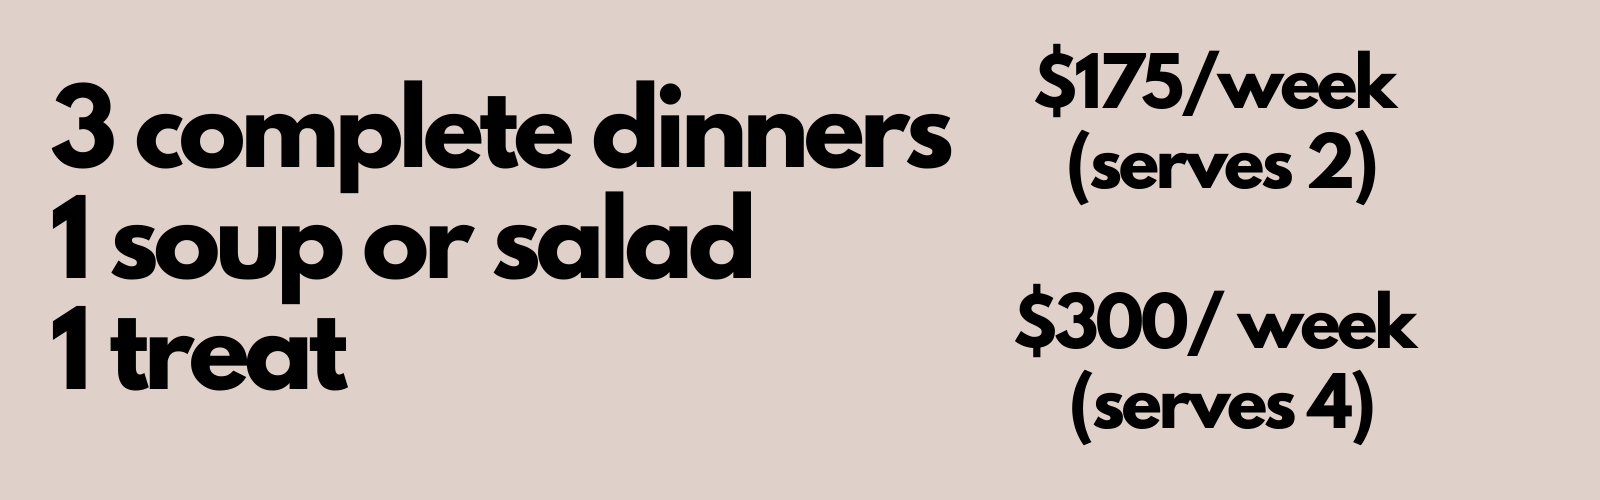 Black bold text on muted pink background that says "3 complete dinners, 1 soup or salad, 1 treat. $175/week (serves 2) $300/week (serves 4)"